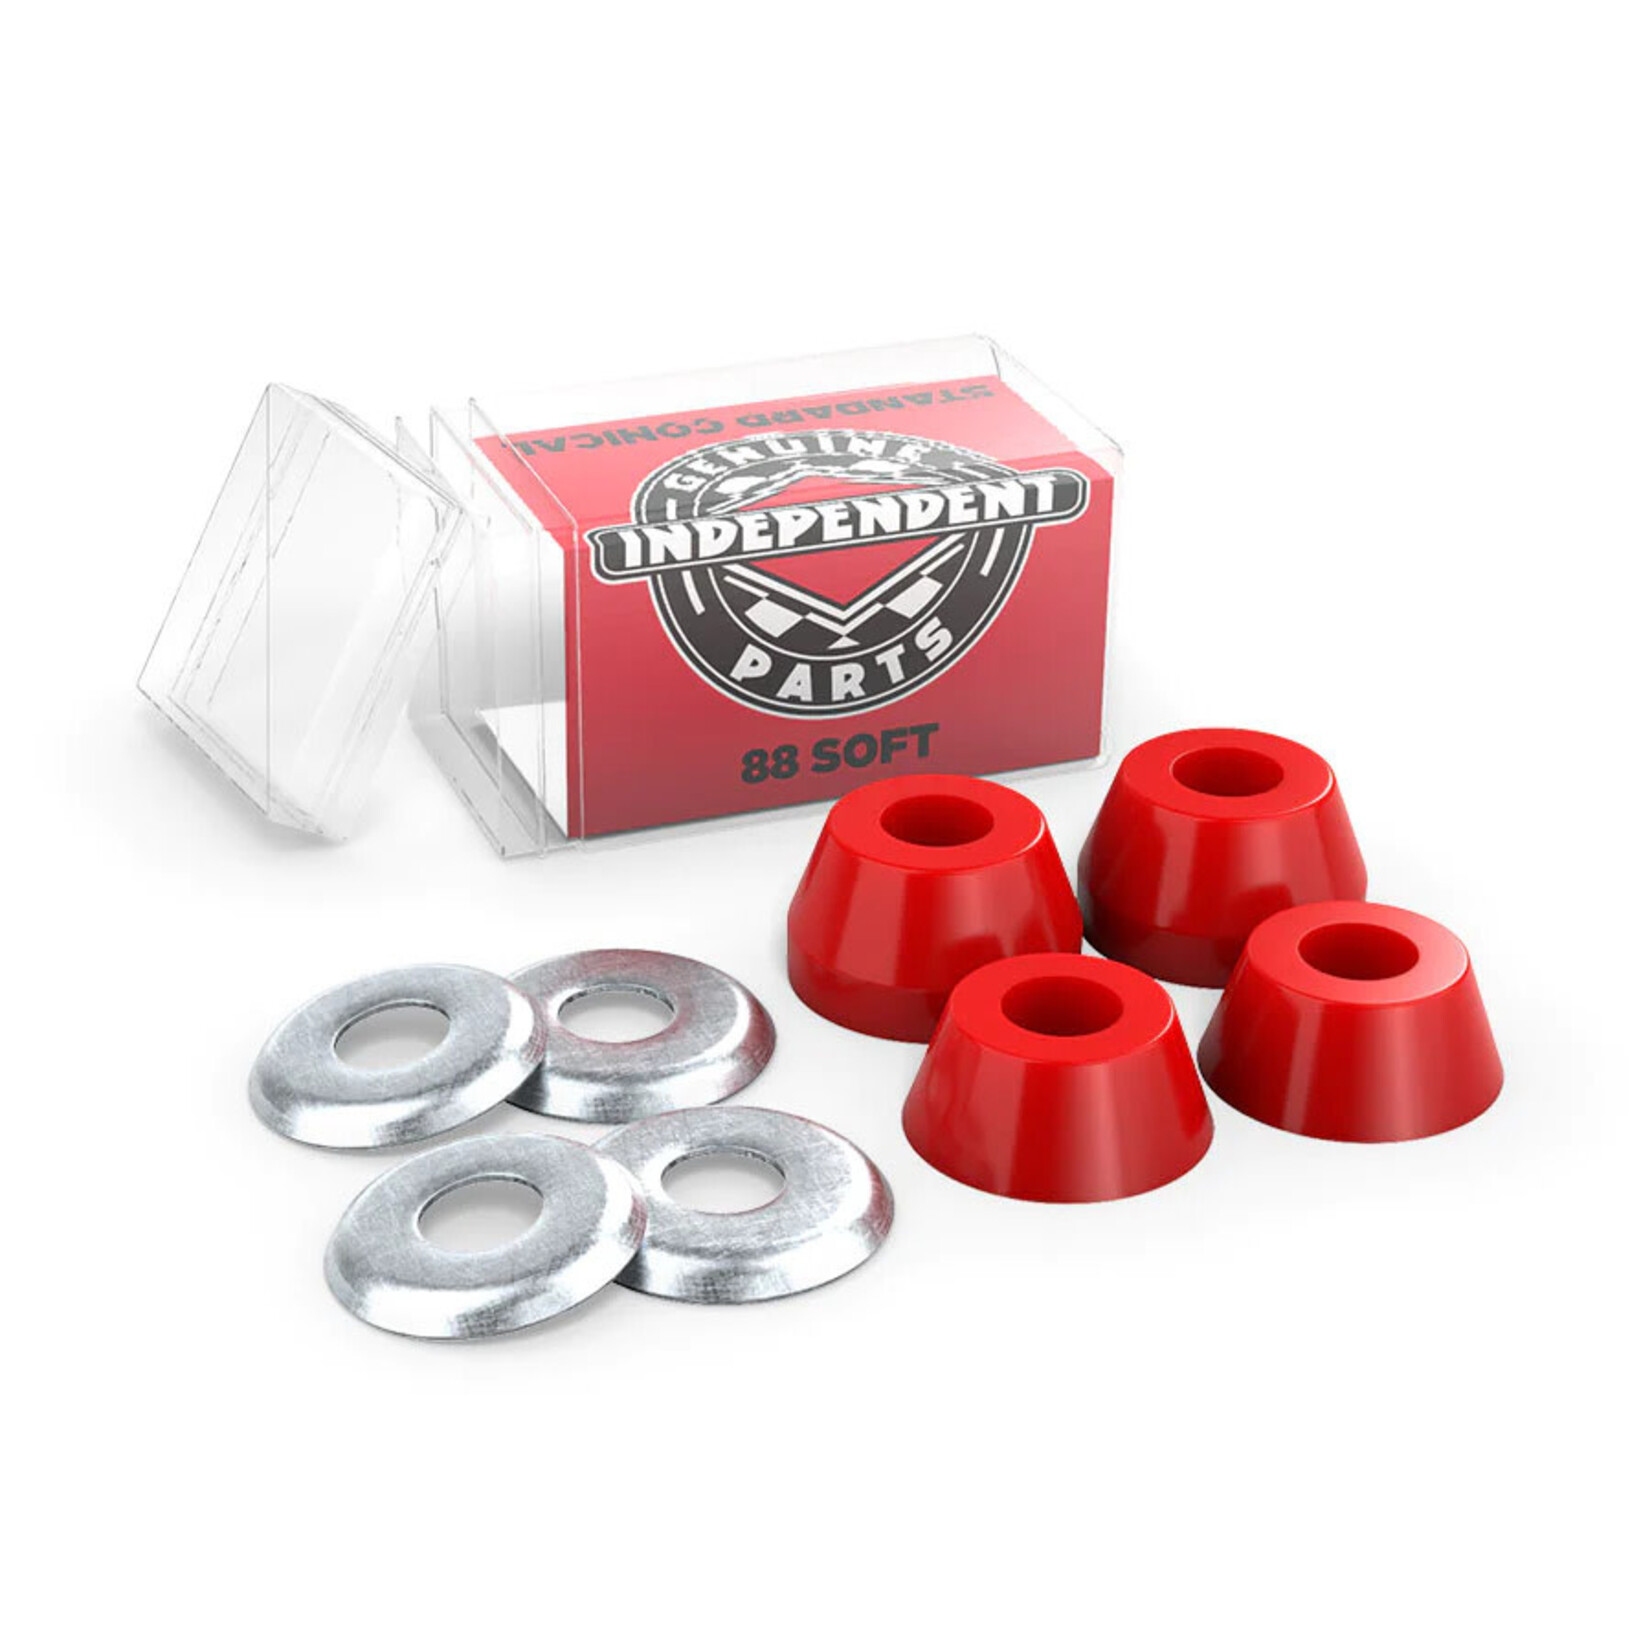 Independent Independent - Bushings - Conical - Soft - Red- 88a